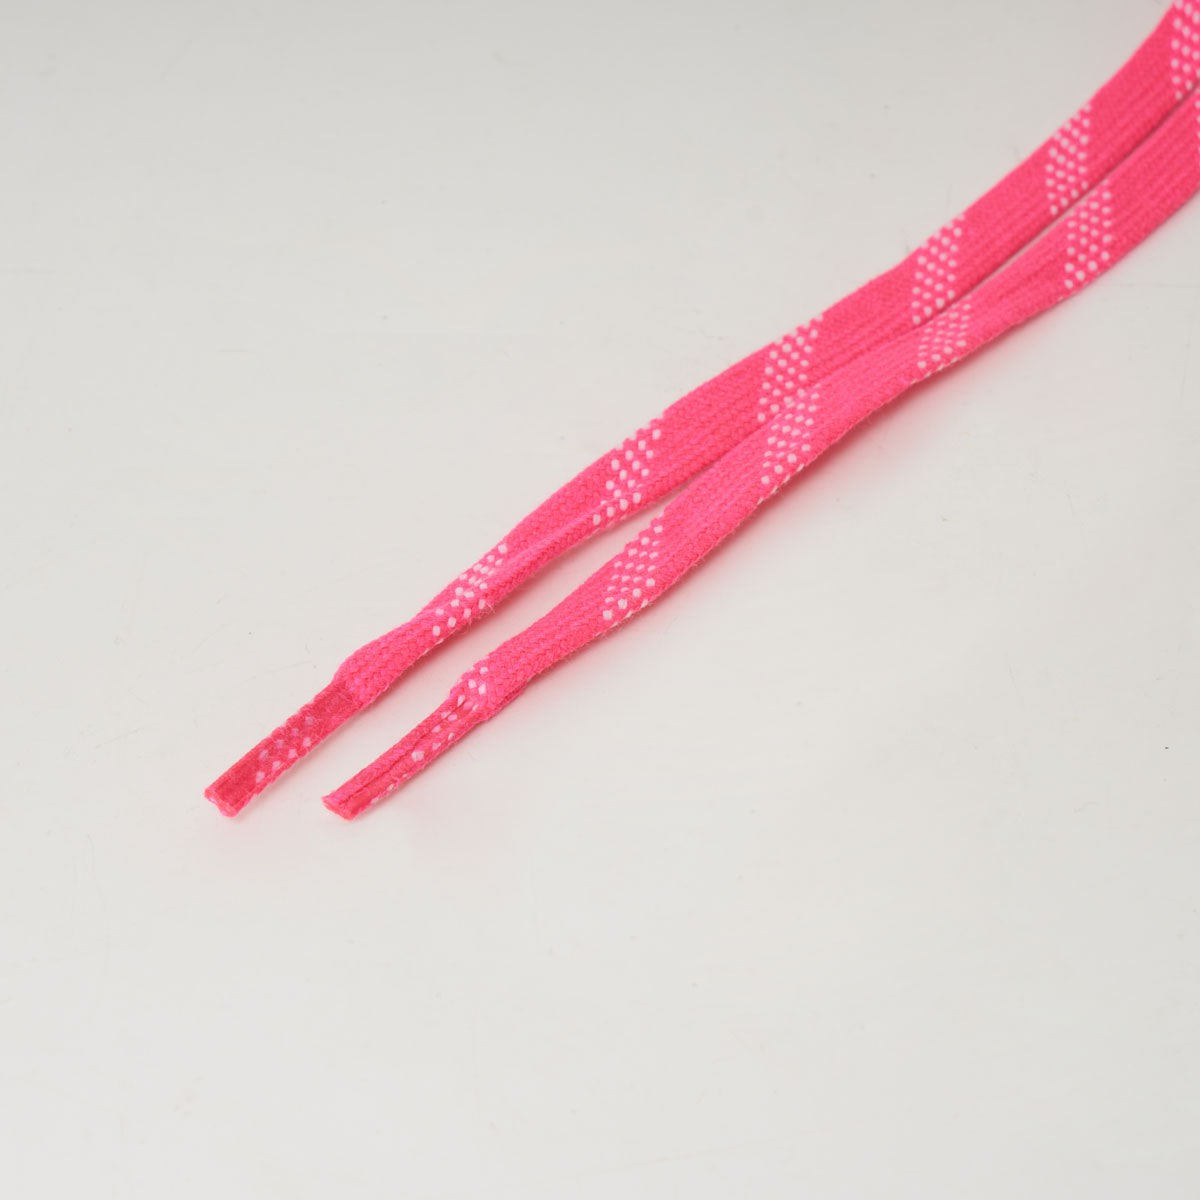 Myfit Waxed Pro Laces - Pink/White